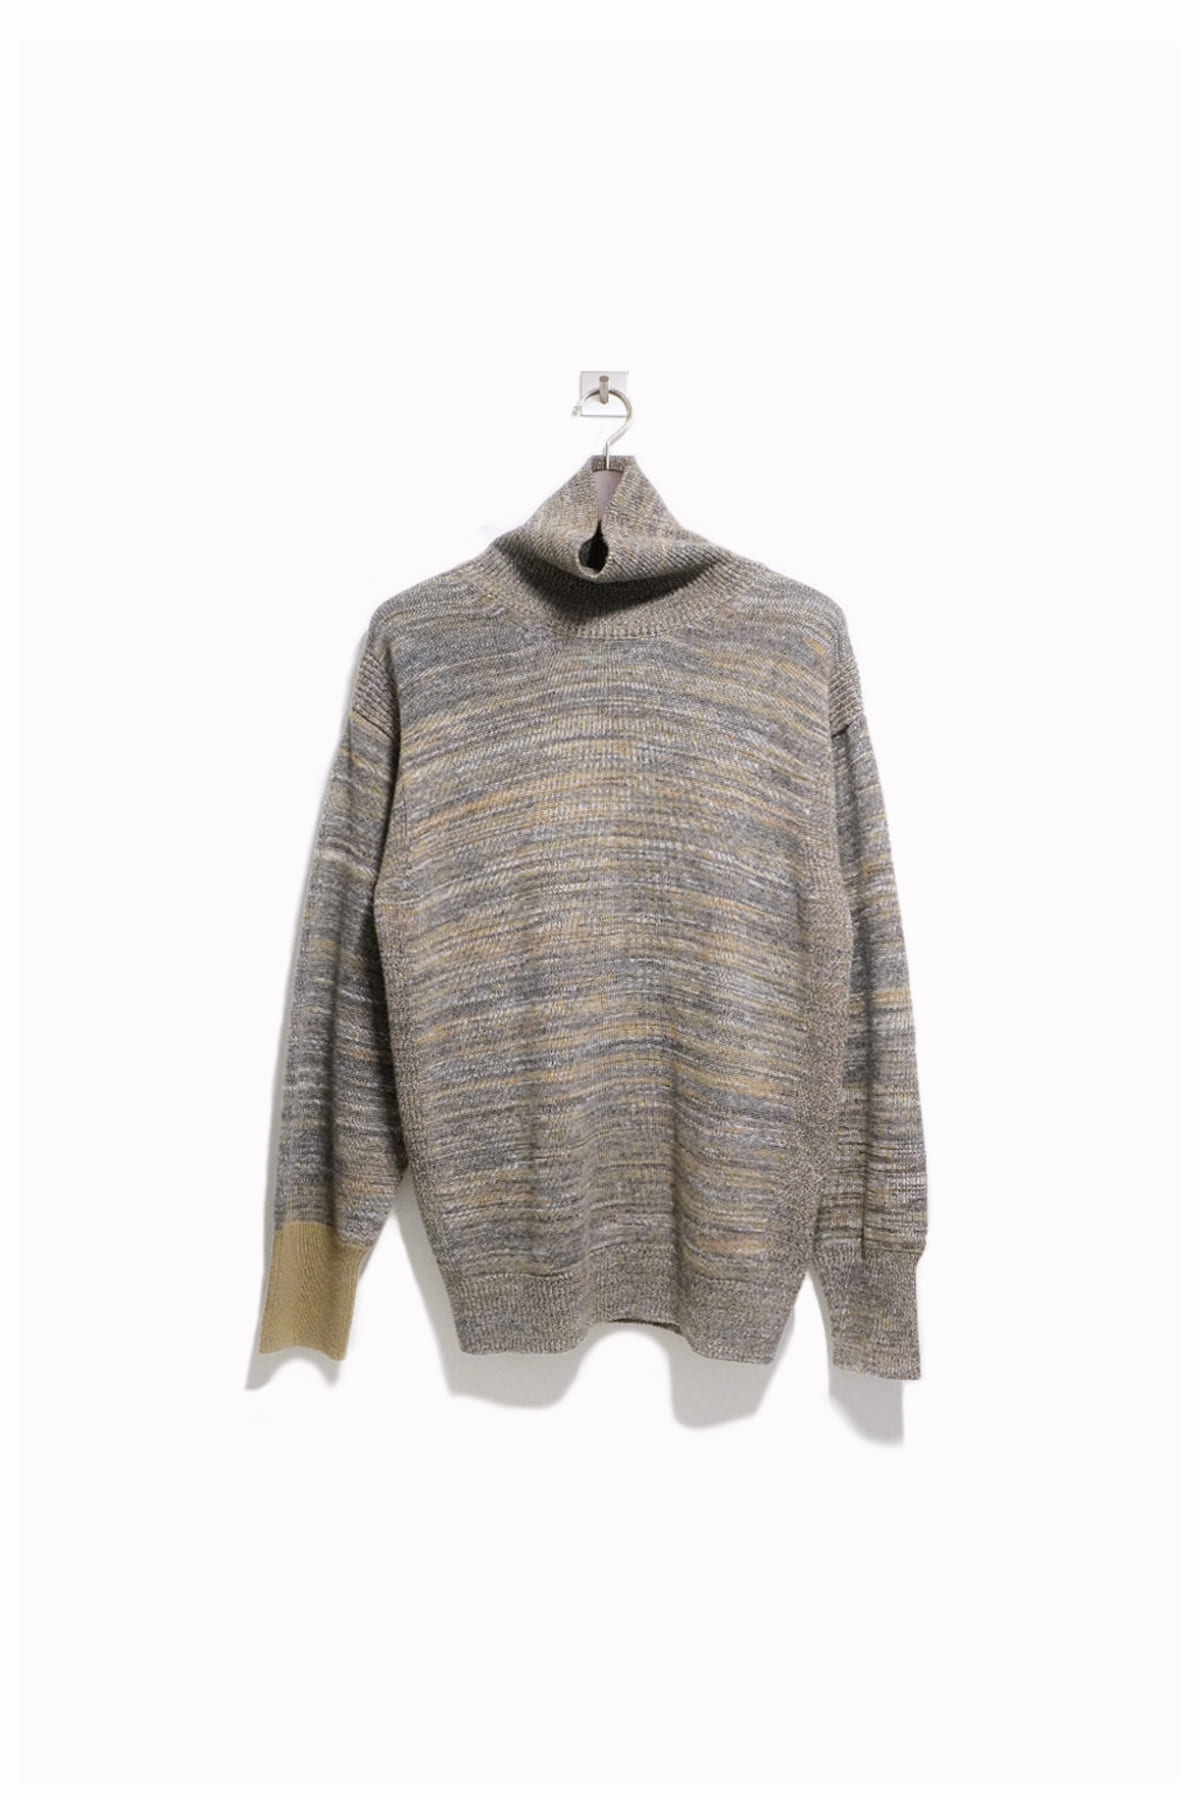 [DOCUMENT] Turtle Neck Sweater - Afternoon Grey